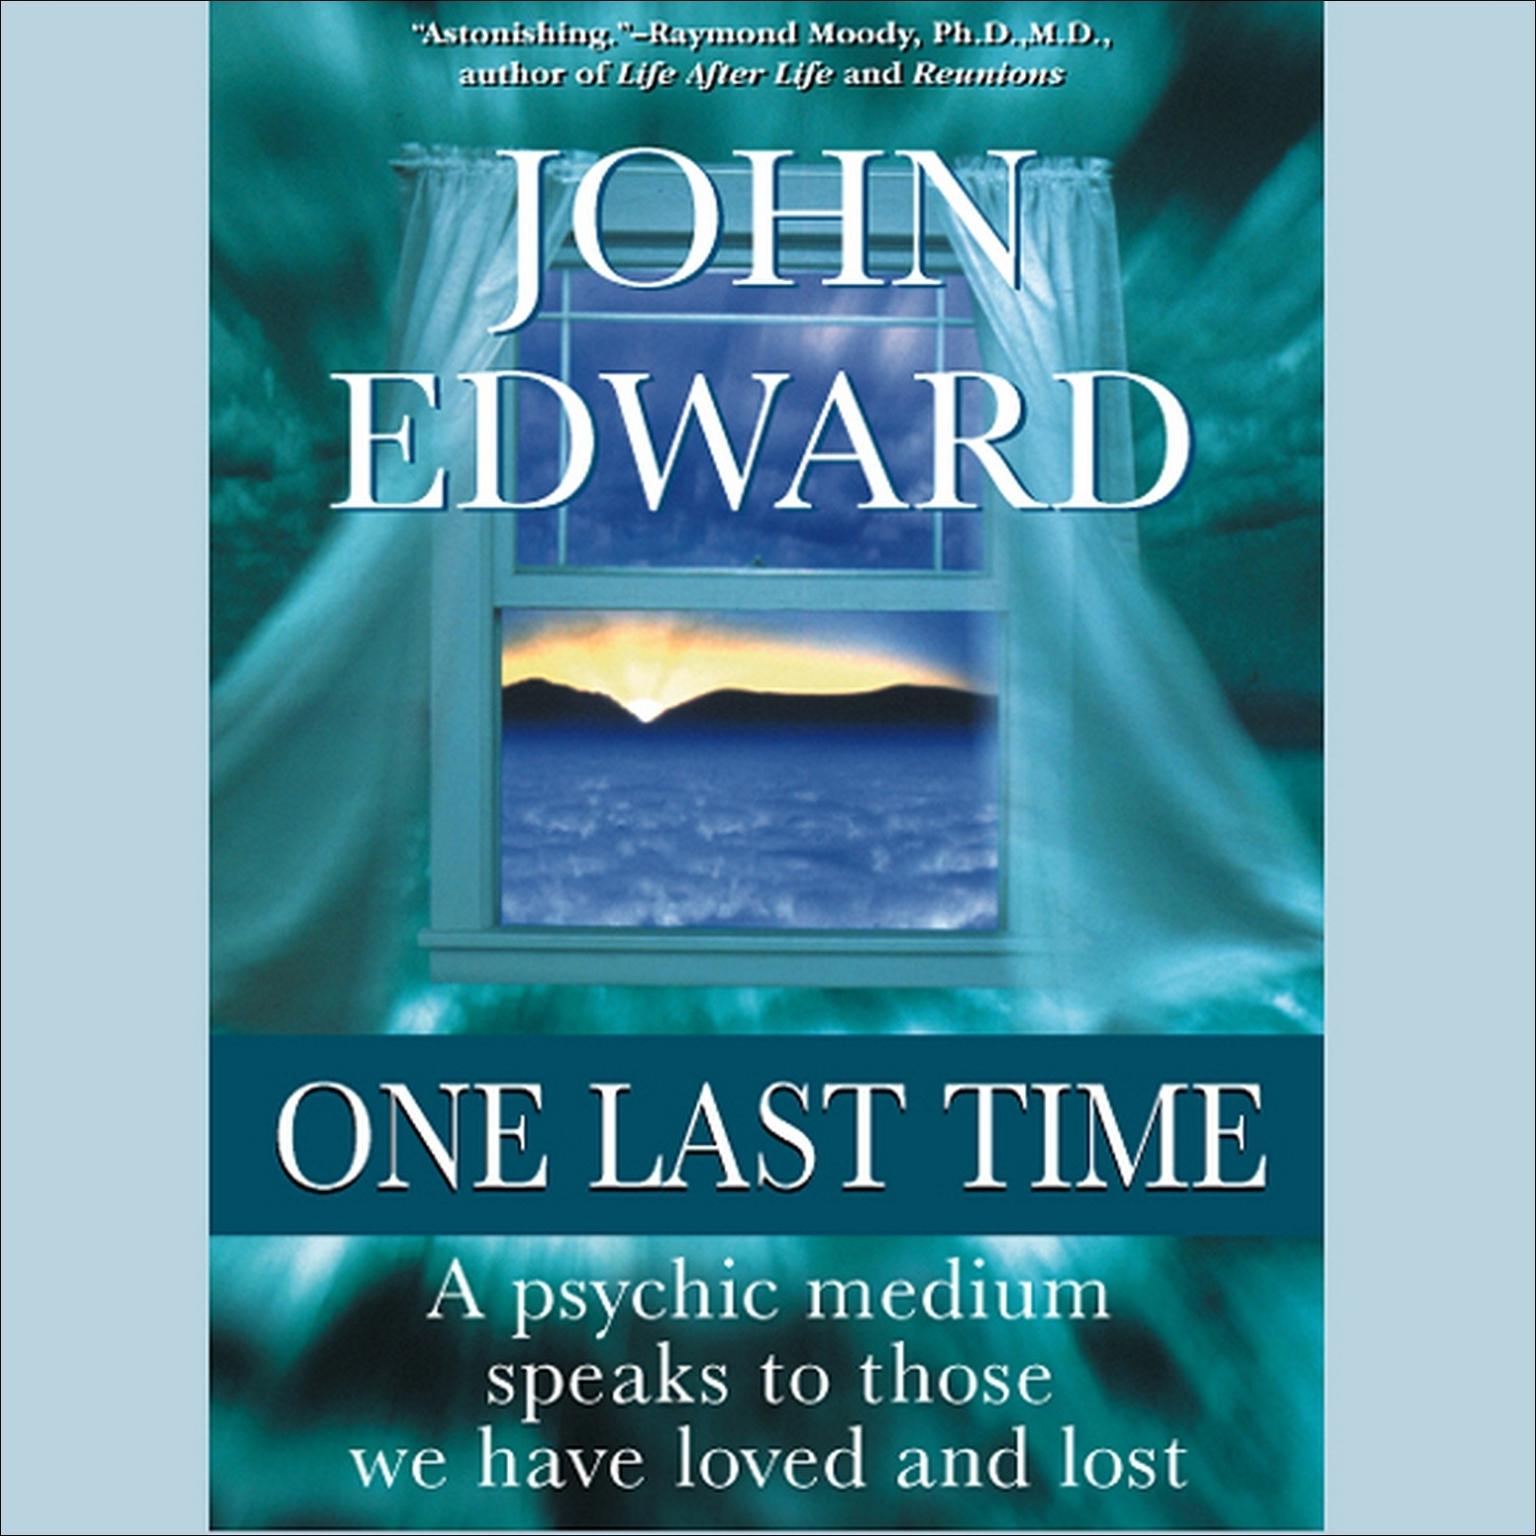 One Last Time (Abridged): A Psychic Medium Speaks to Those We Have Loved and Lost Audiobook, by John Edward